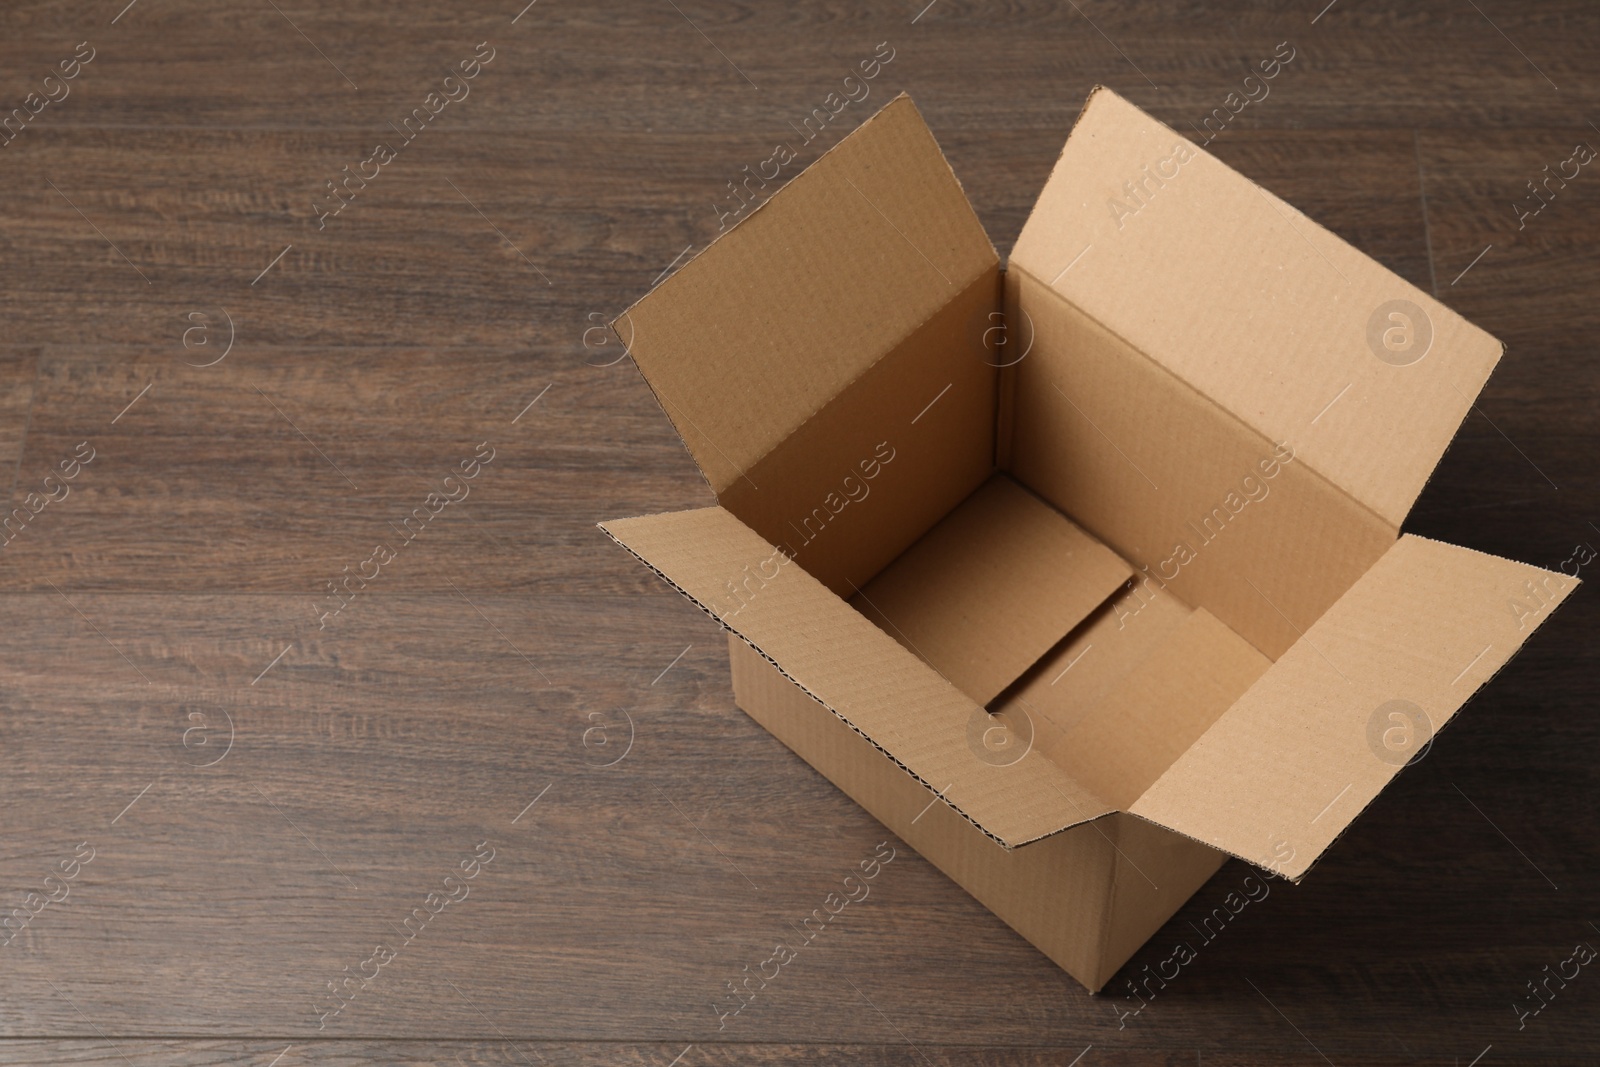 Photo of Empty open cardboard box on wooden table. Space for text